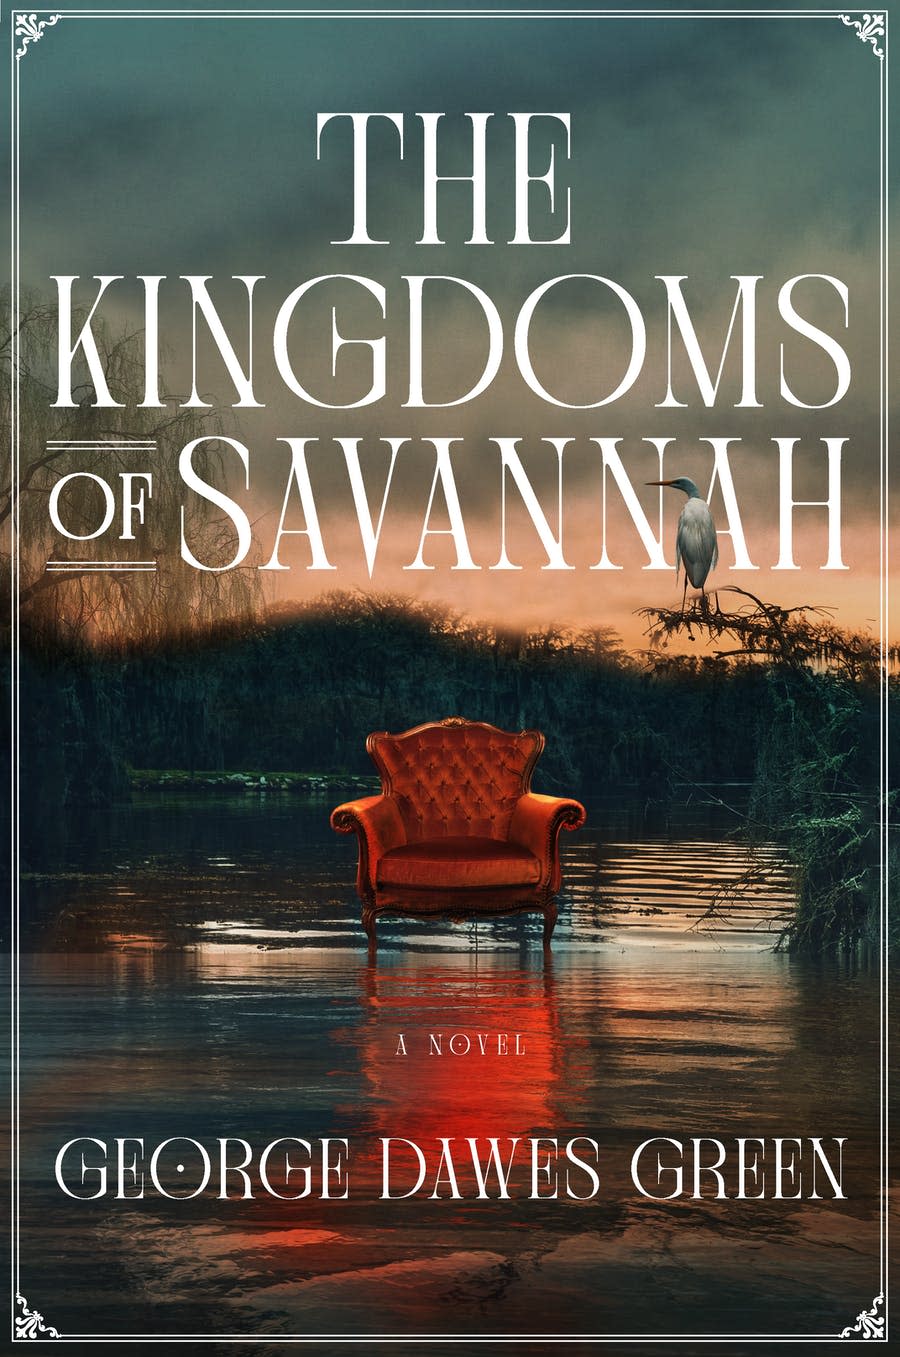 'The Kingdoms of Savannah' by George Dawes Green is available at local booksellers.